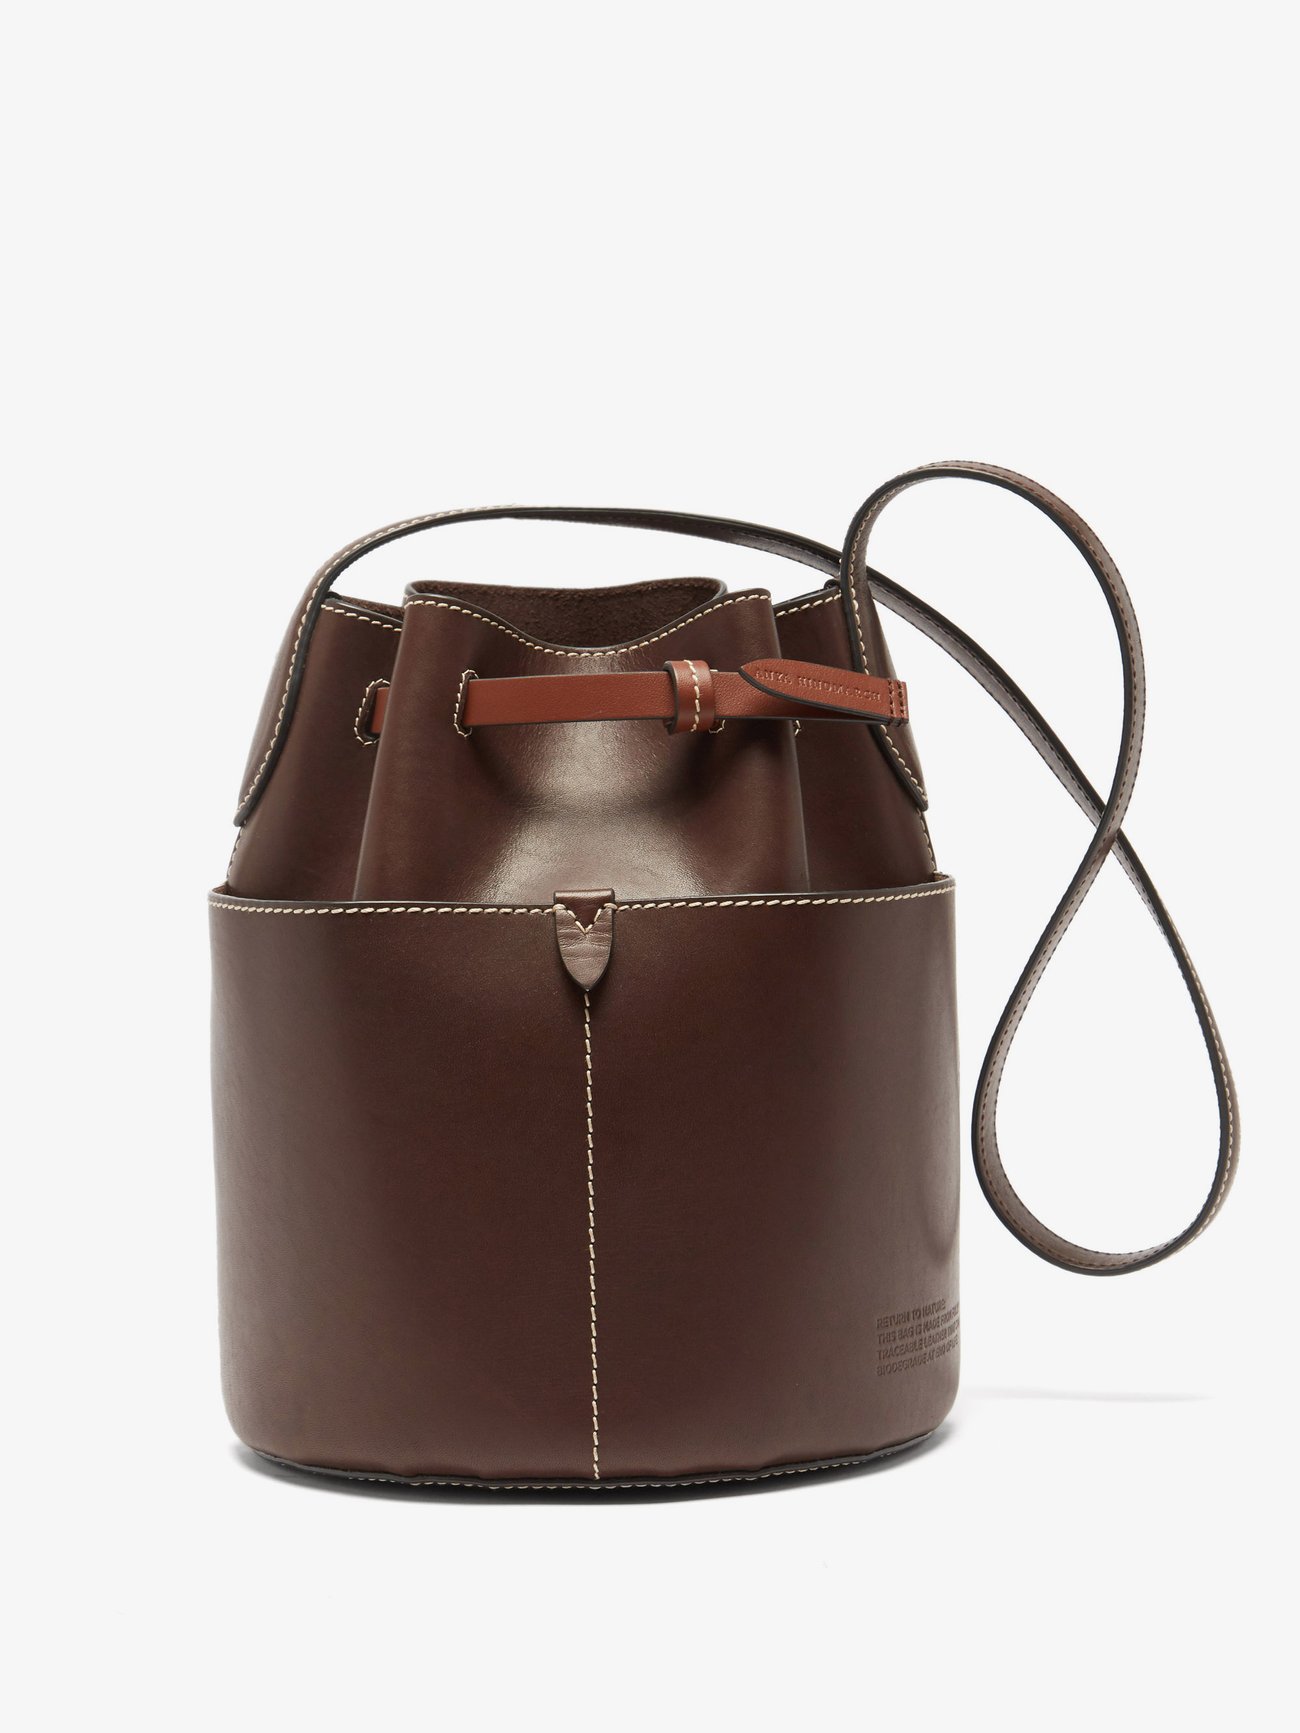 Return to Nature small leather bucket bag